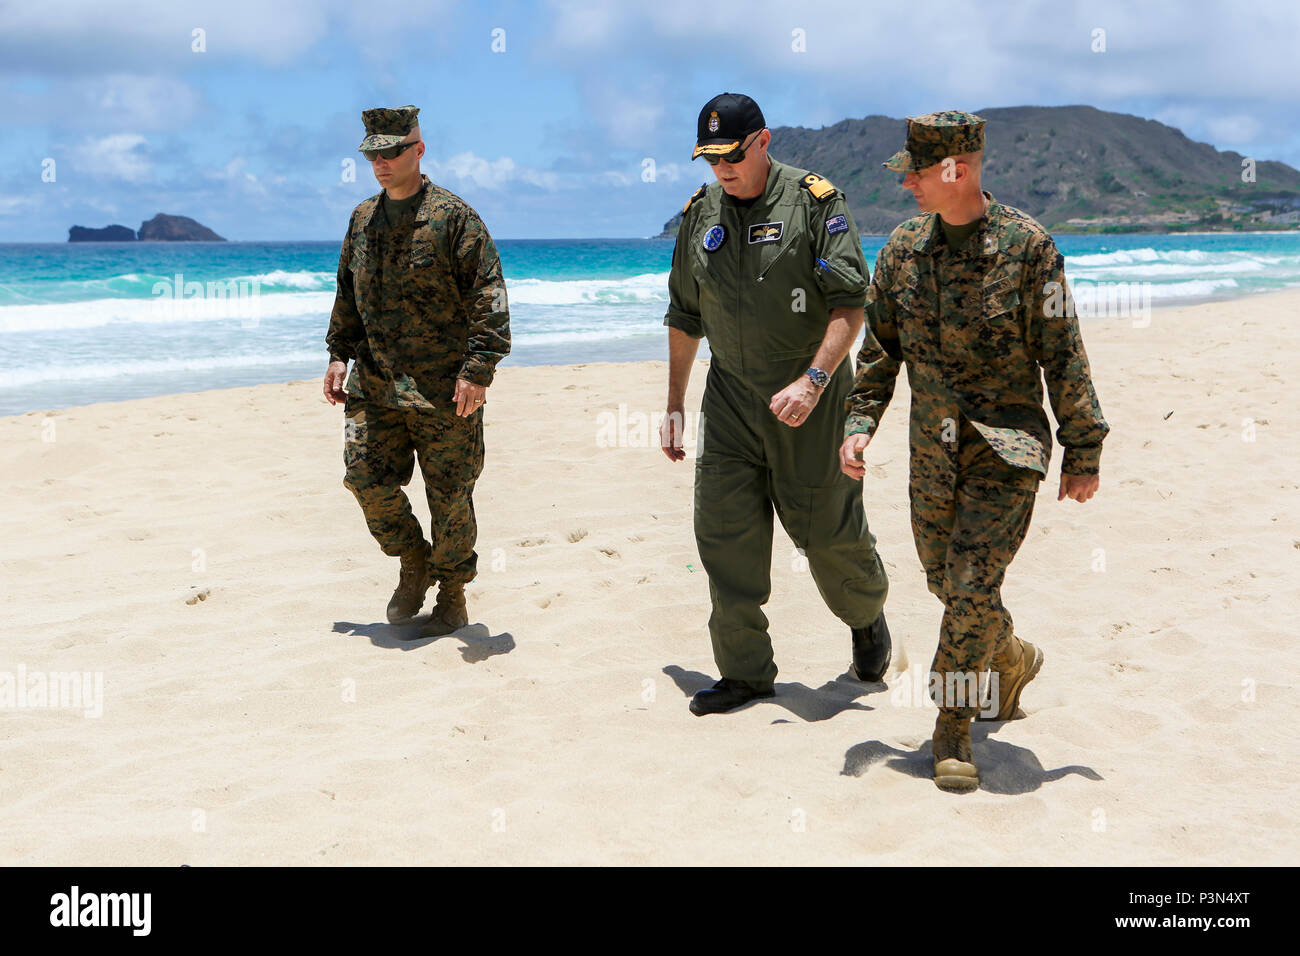 160714-M-JM737-009 MARINE CORPS BASE HAWAII (July 14, 2016) - U.S. Marine Brig. Gen. David Bellon, Royal New Zealand Navy Commodore Jim Gilmour and U.S. Marine Col. Carl Cooper move to observe U.S. Marines from Combat Assault Company, 3rd Marine Regiment and members of the Japan Ground Self-Defense Force re-embark Assault Amphibious Vehicles during Exercise Rim of the Pacific 2016. Bellon is the Fleet Marine Officer, Amphibious Force; Gilmour is the Combined Forces Amphibious Component Commander, Cooper is the Commanding Officer, Provisional Marine Expeditionary Brigade Hawaii. Twenty-six nati Stock Photo